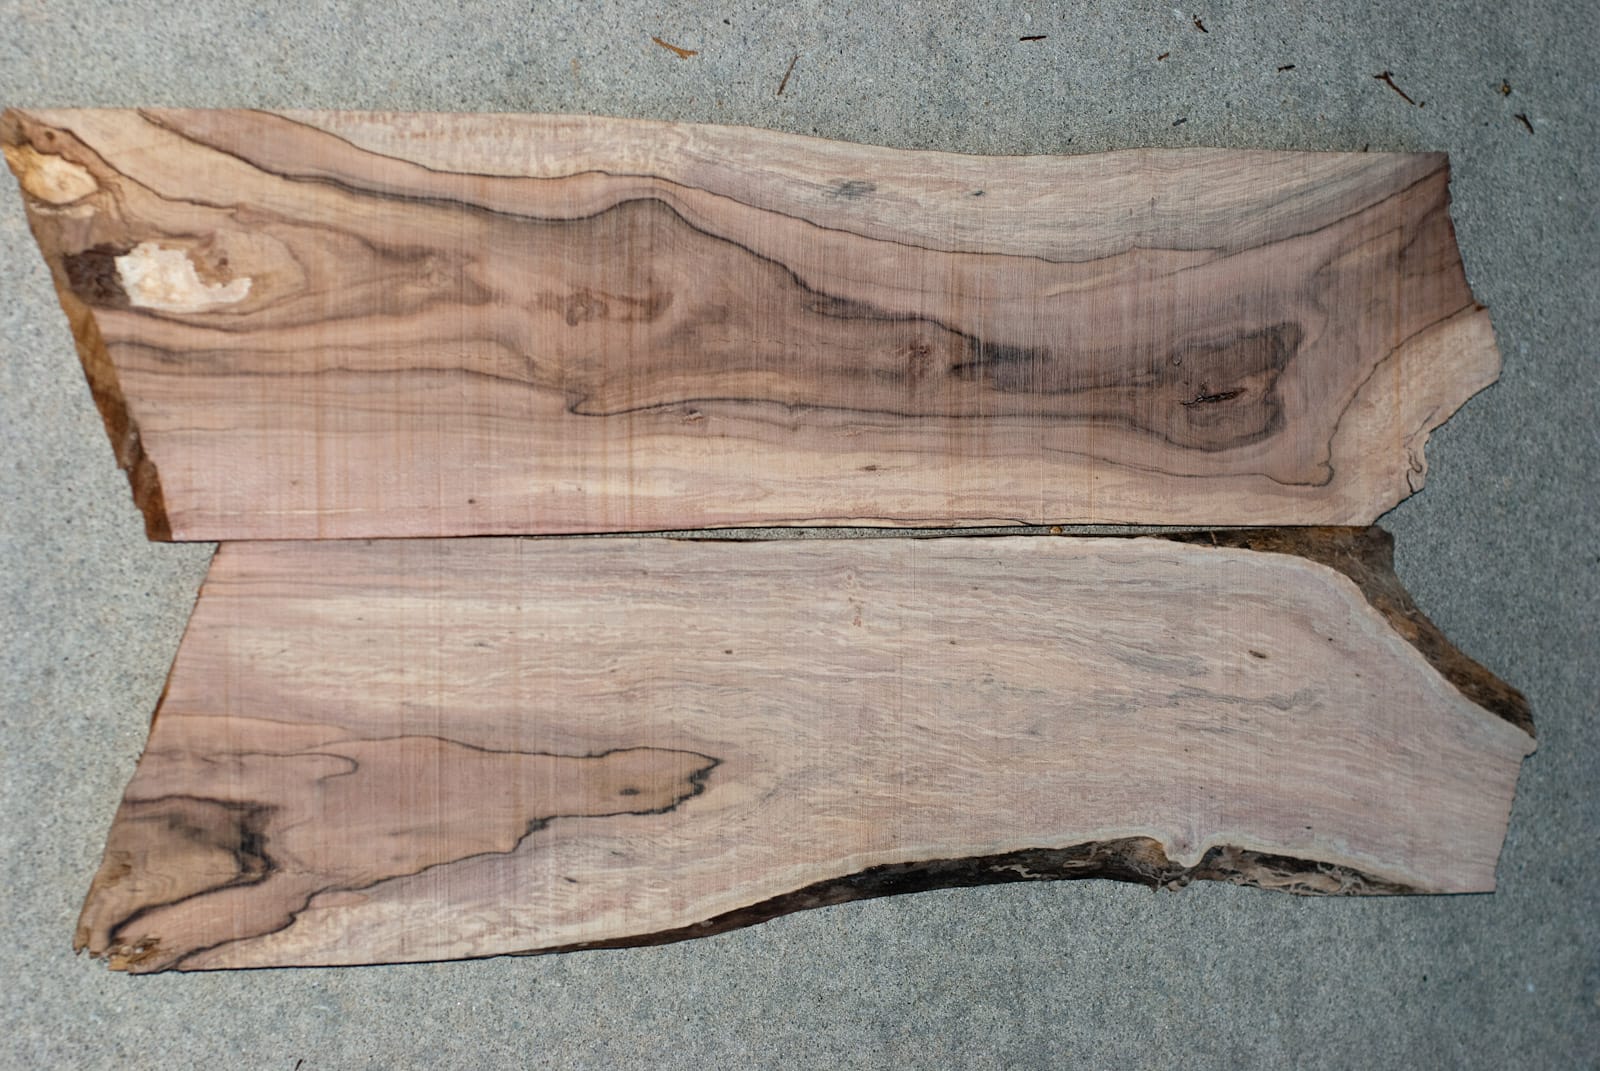 Spalted Dogwood - What to do, what to do